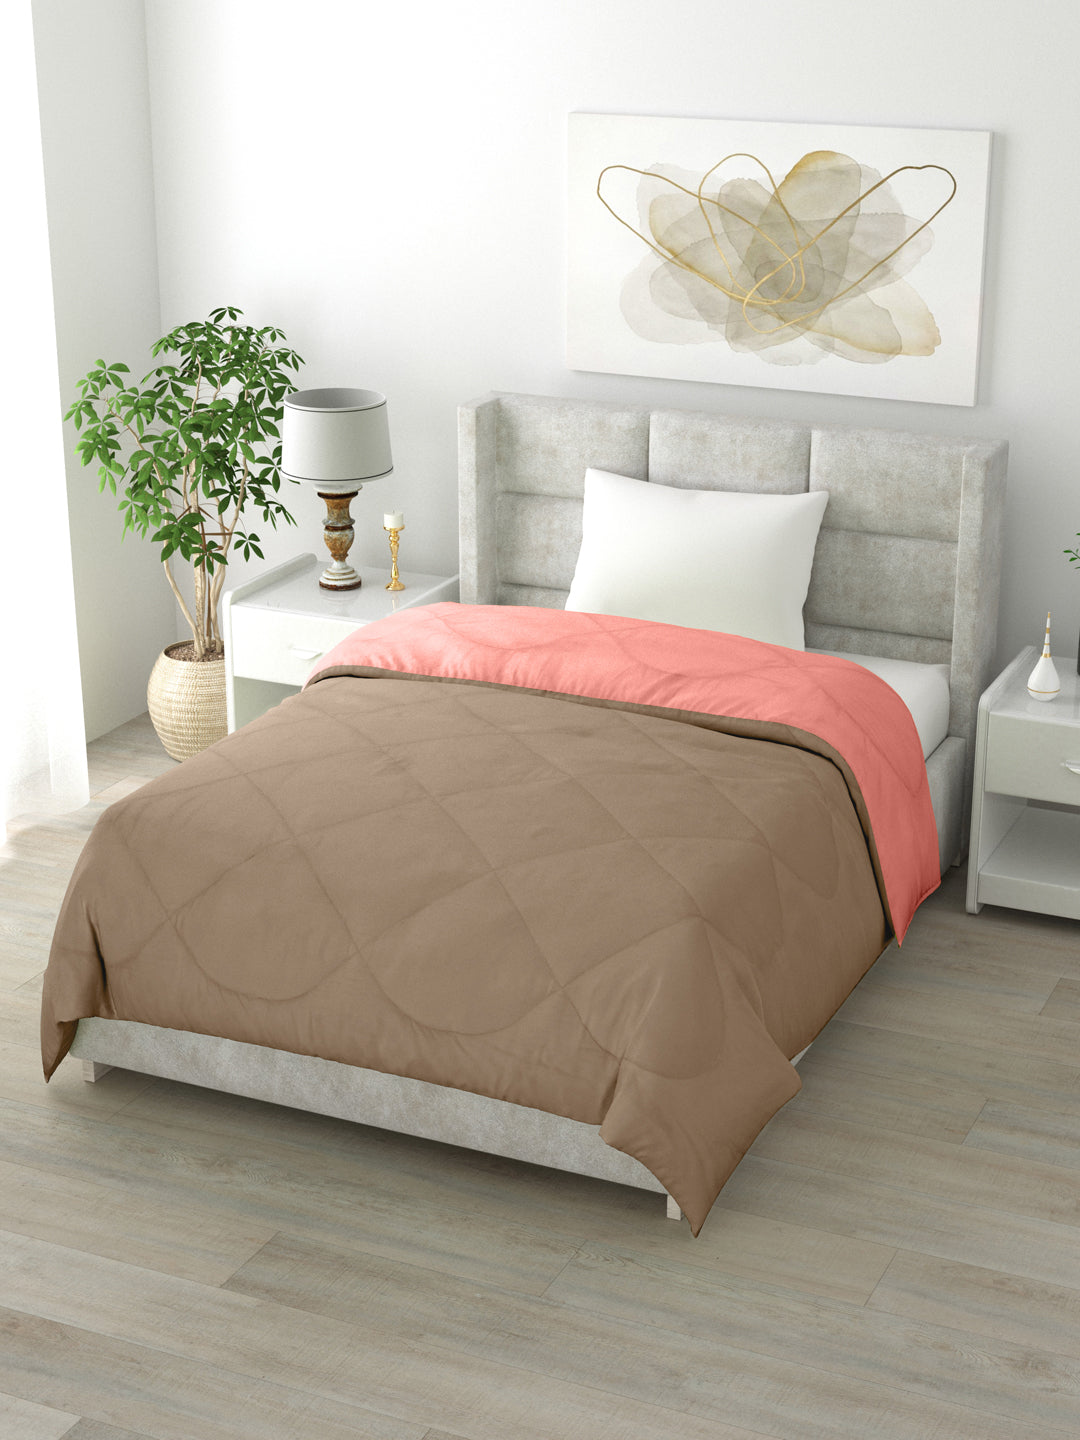 Reversible Single Bed Comforter 200 GSM 60x90 Inches (Taupe & Candy Peach)